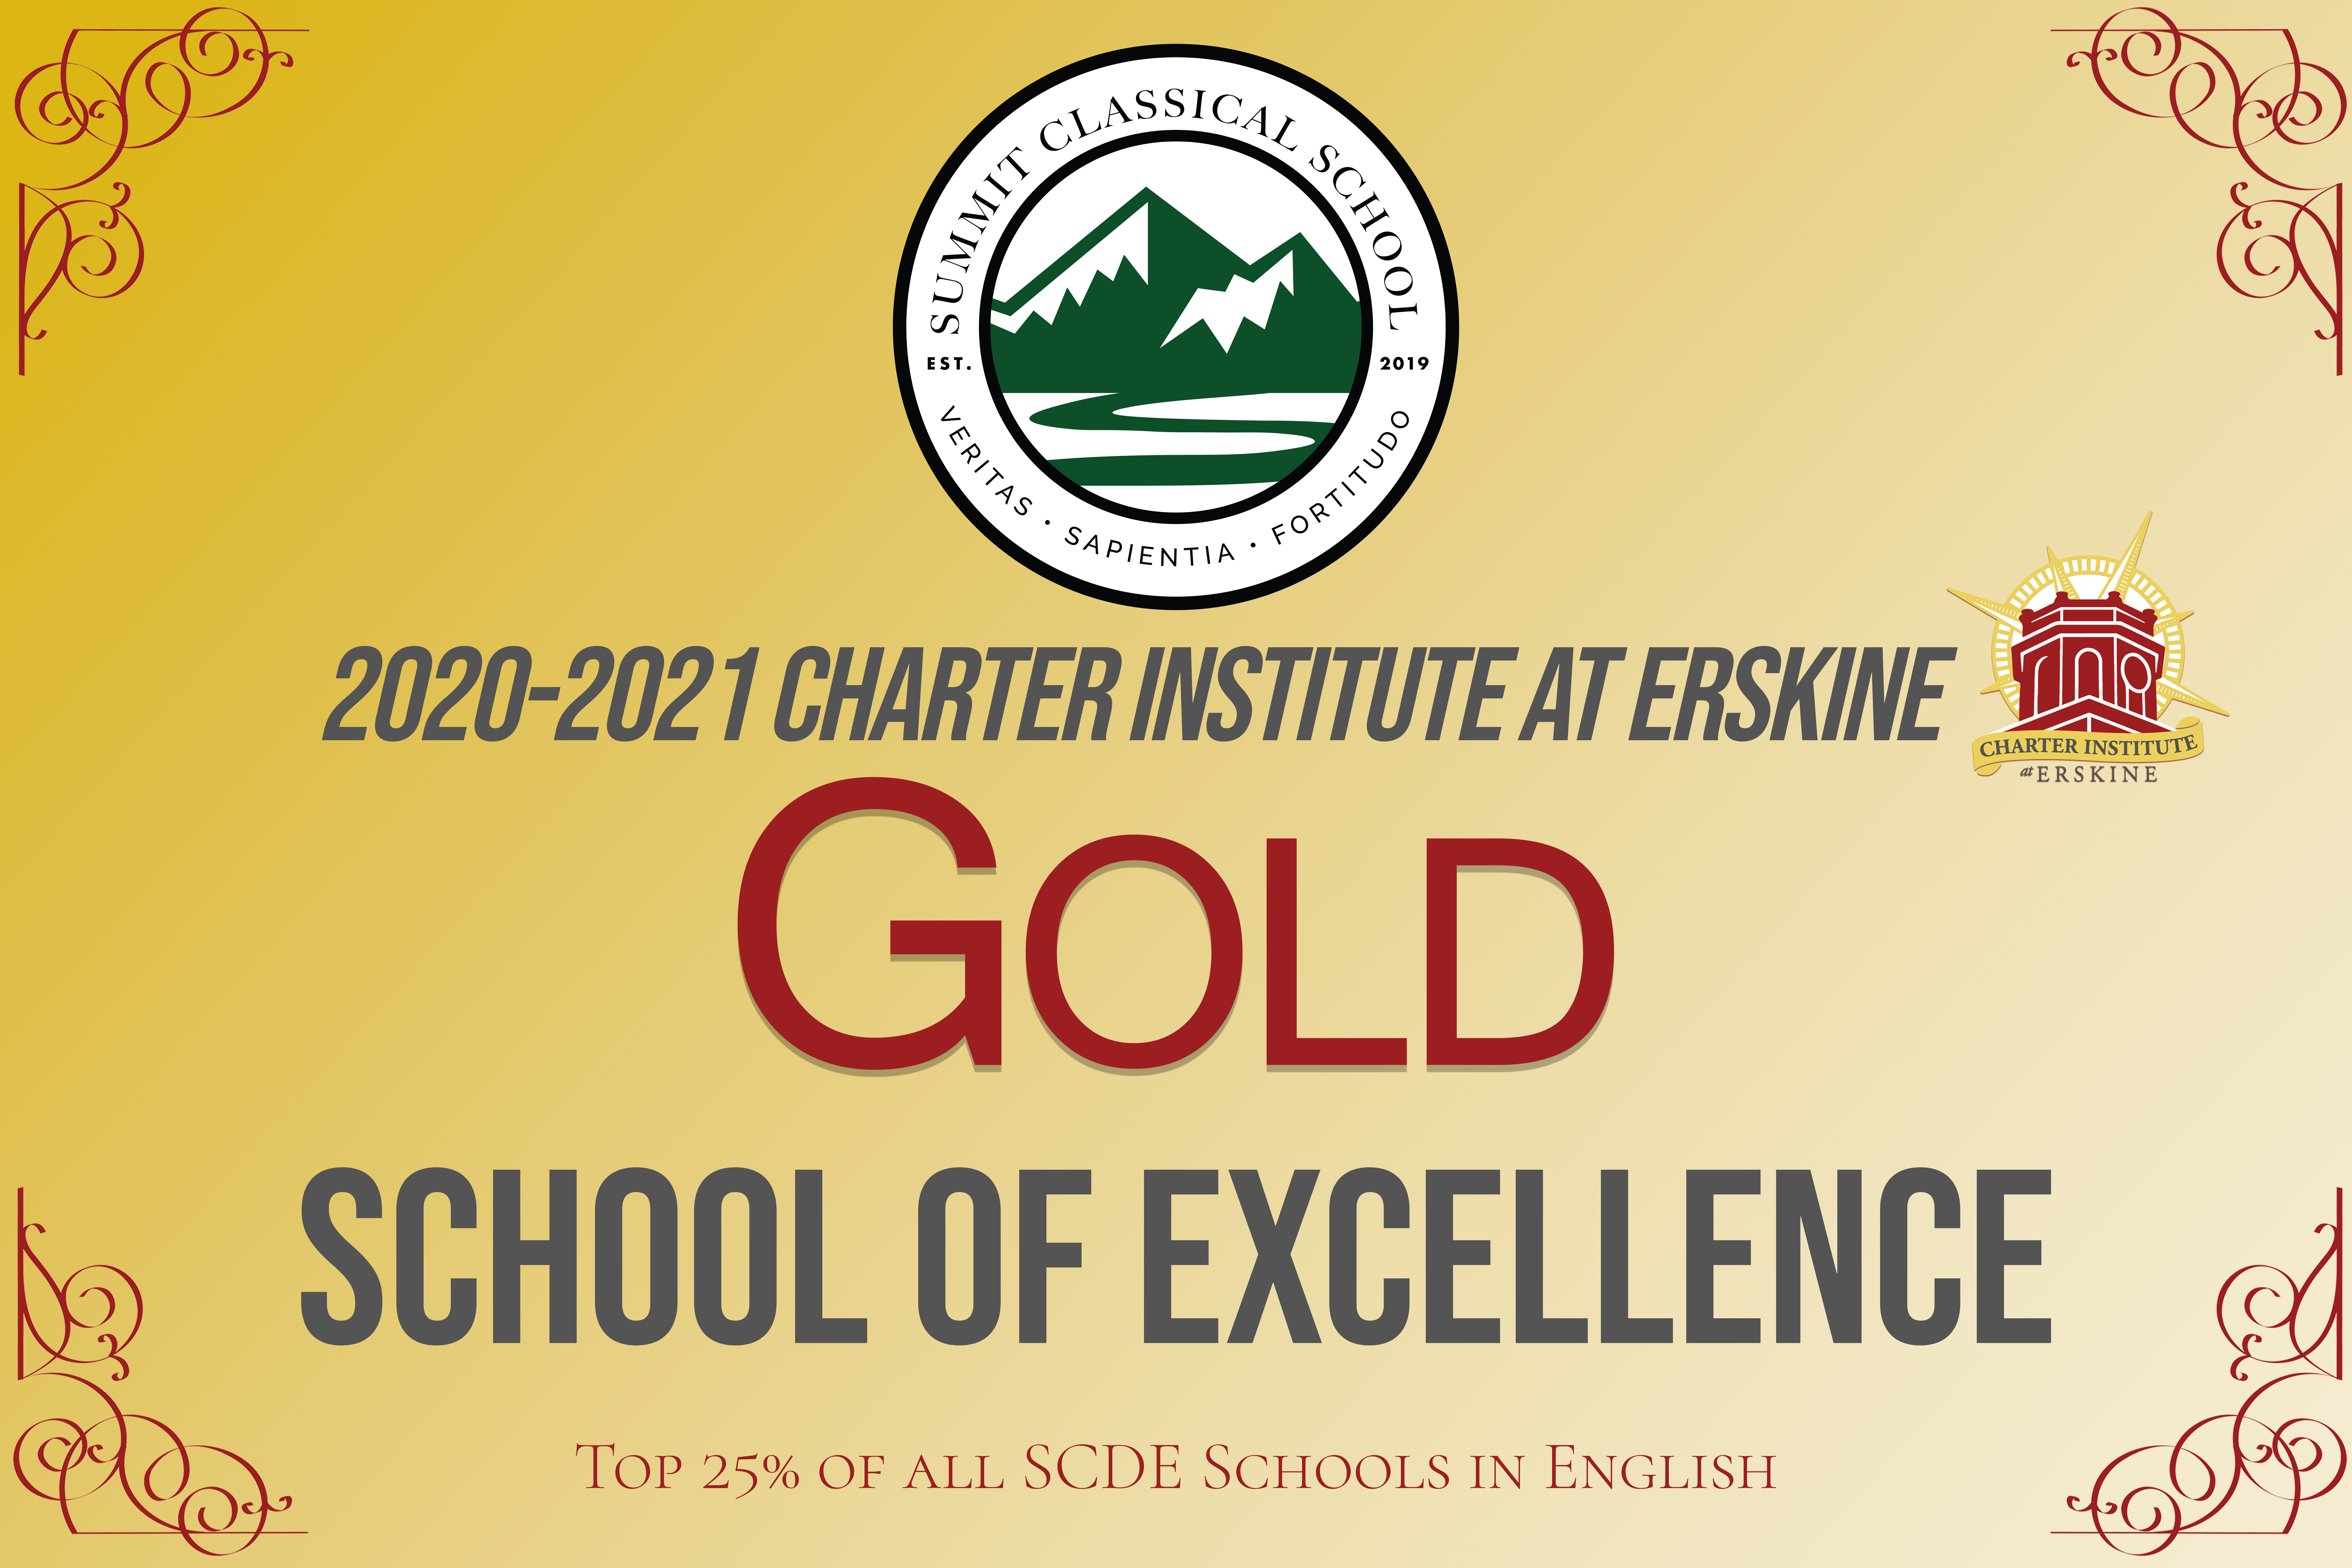 Summit Classical School - Gold School of Excellence